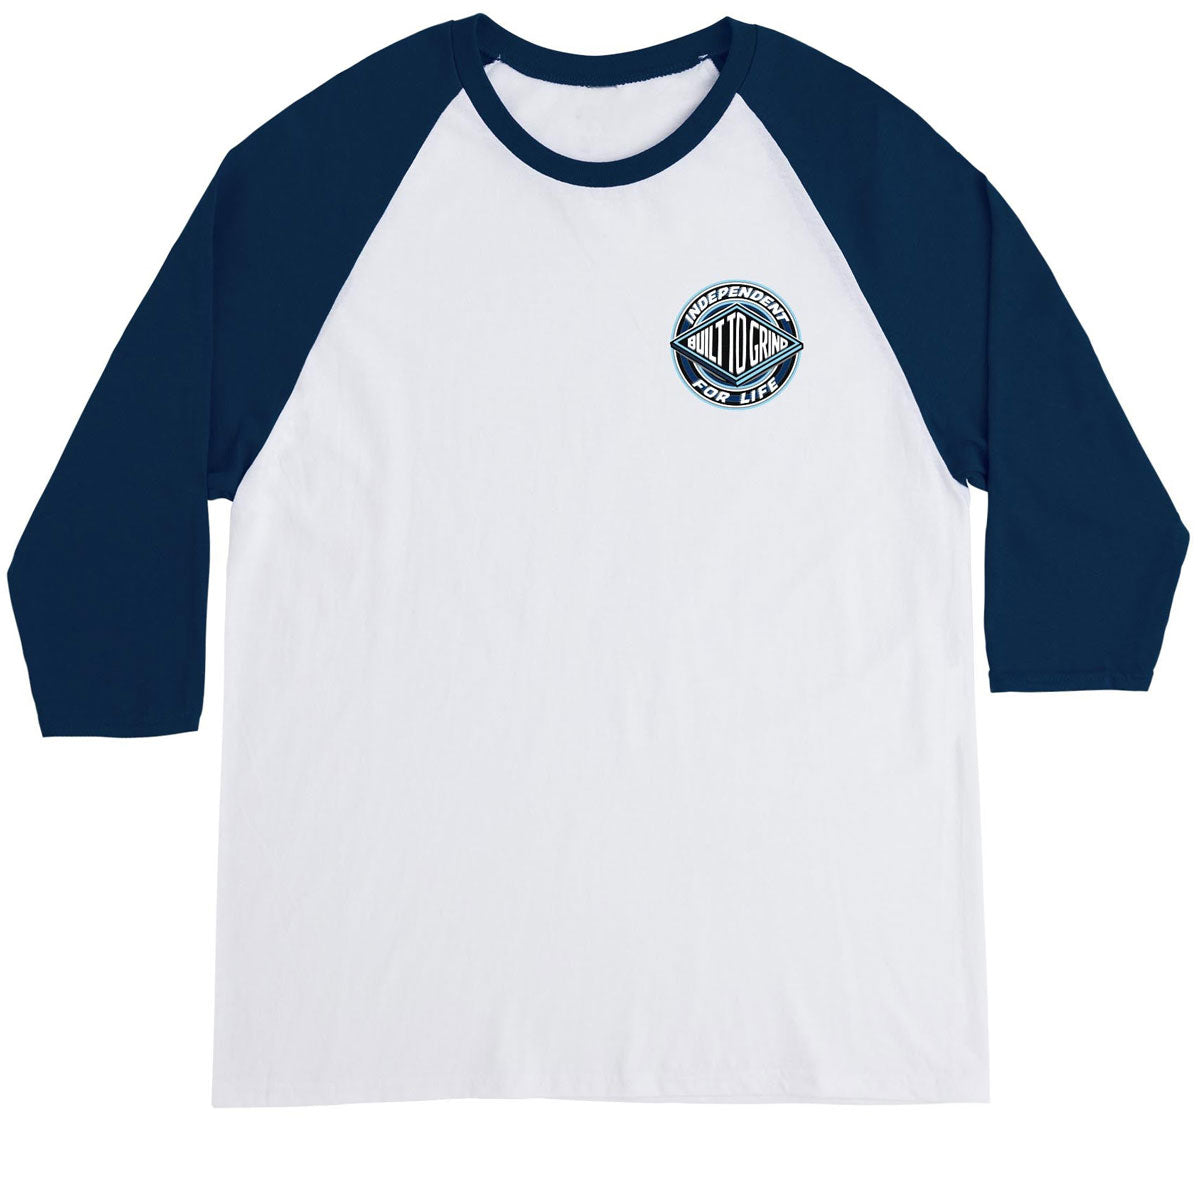 Independent For Life Clutch 3/4 Sleeve T-Shirt - White/Navy image 2